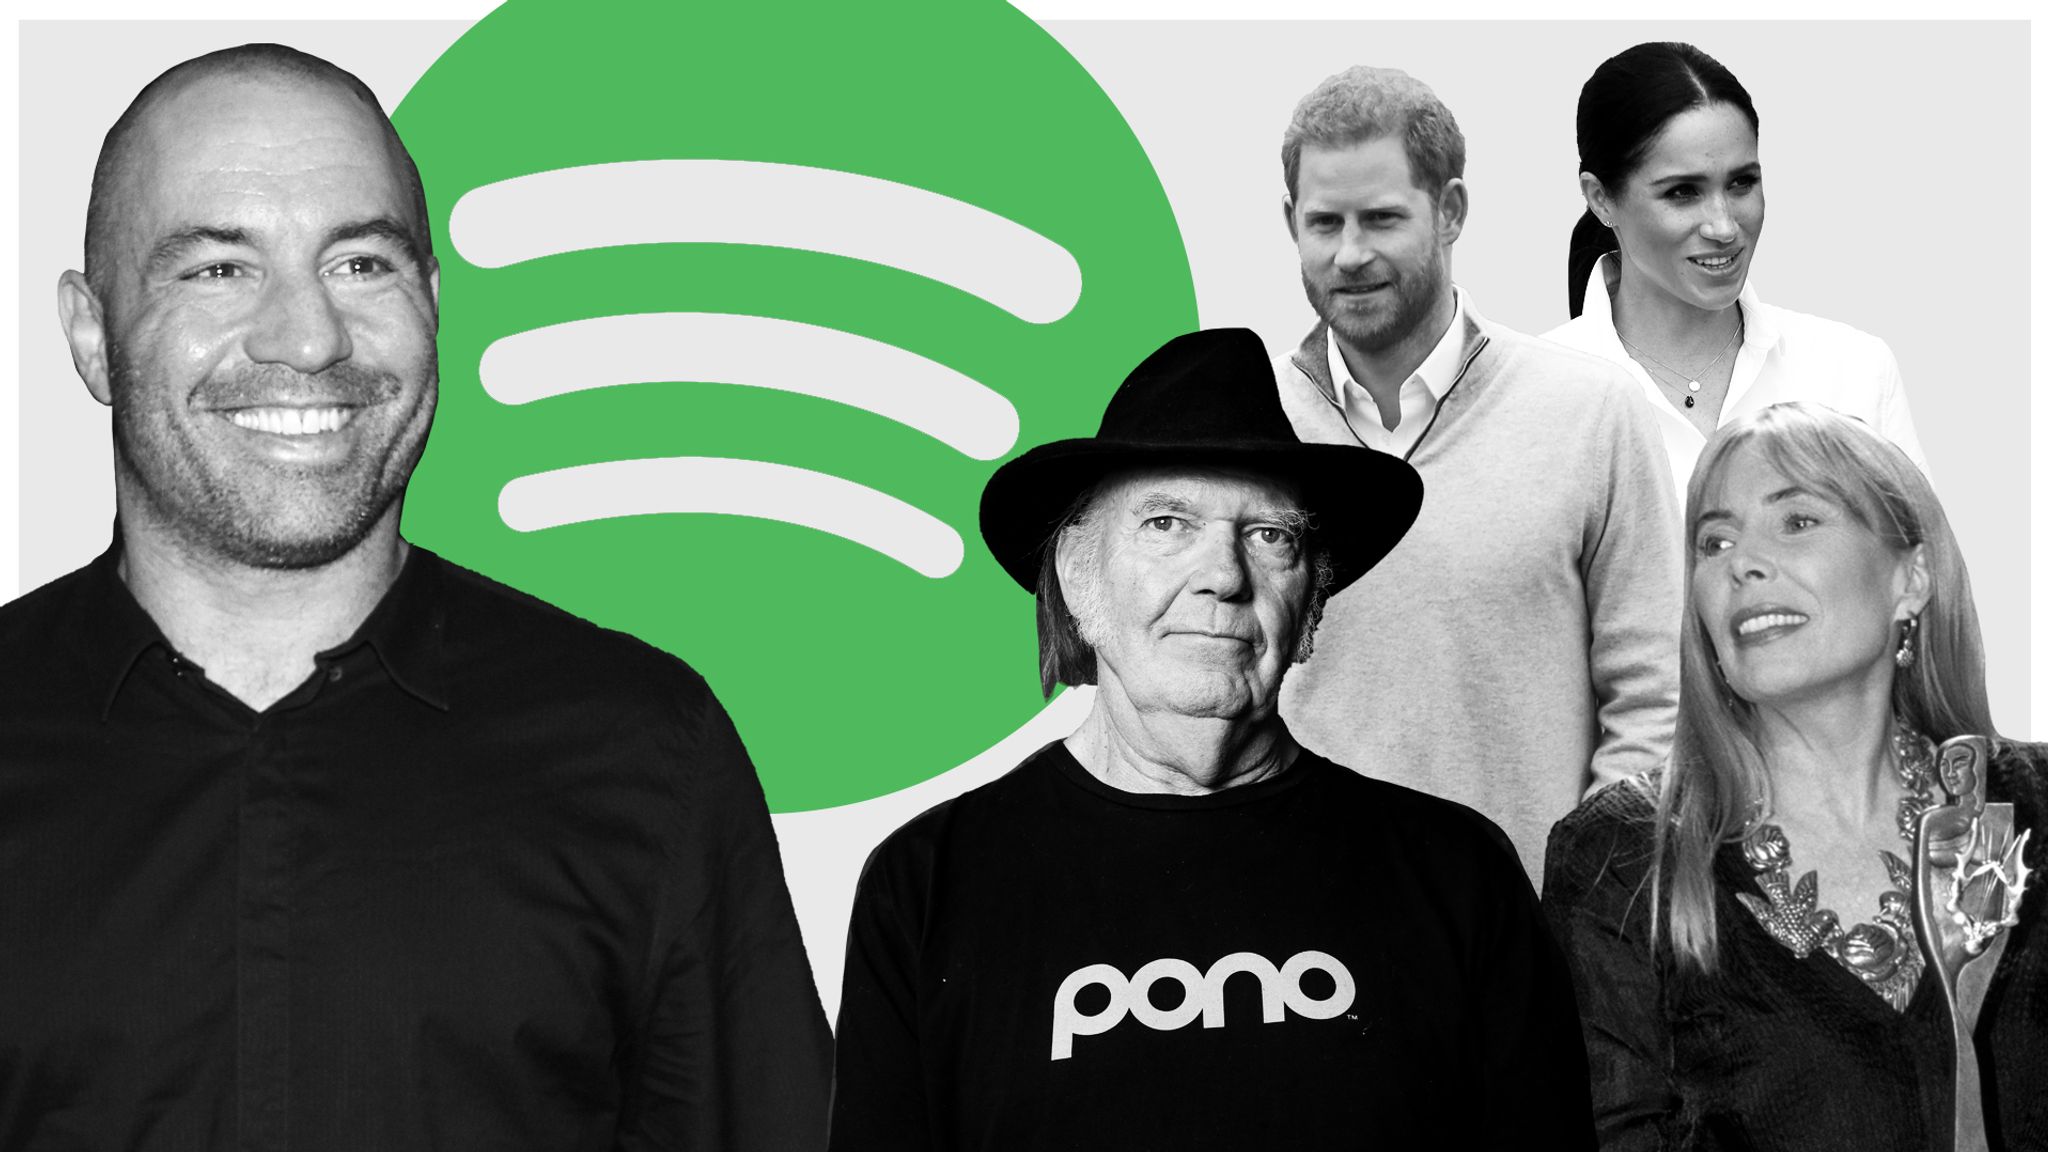 Joe Rogan and Spotify Who is the US podcaster and what is